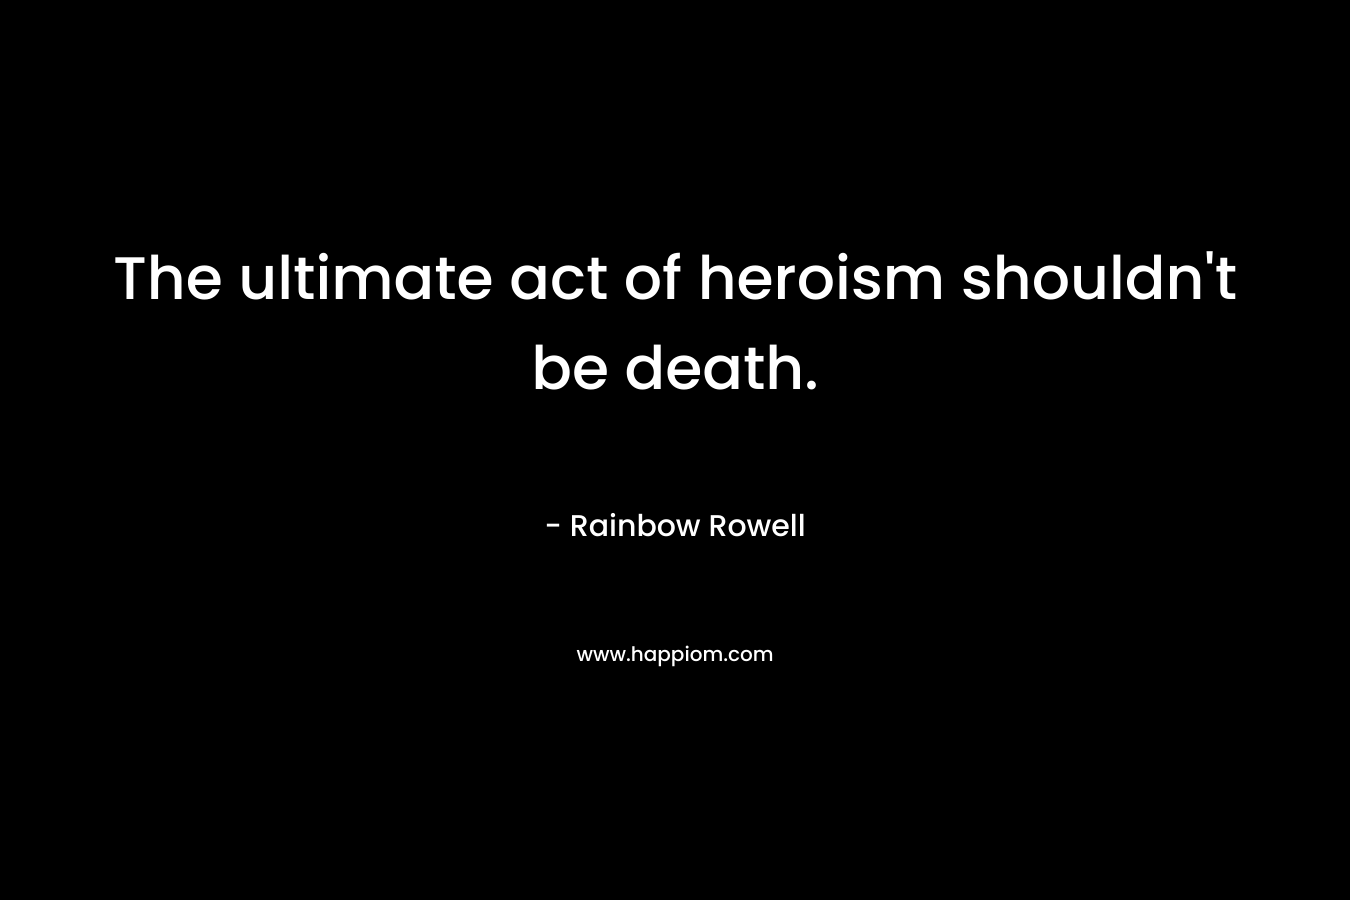 The ultimate act of heroism shouldn’t be death. – Rainbow Rowell